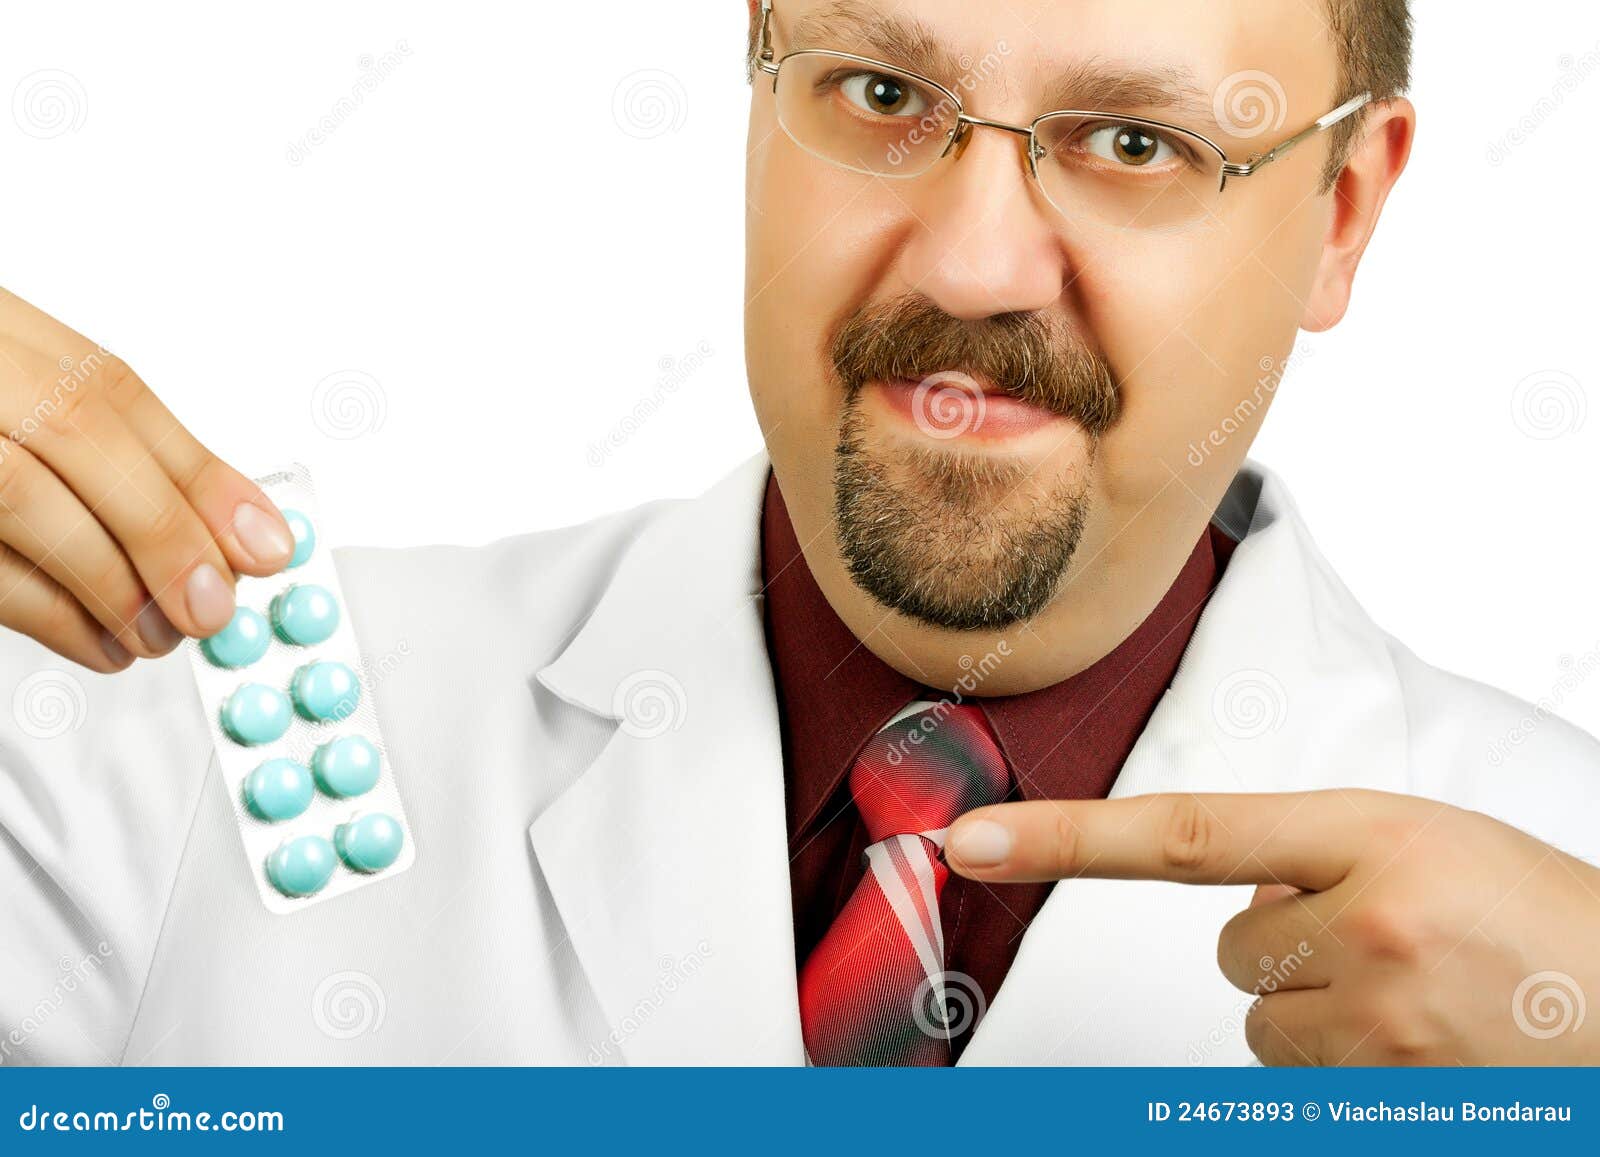 Doctor or Pharmacist stock image. Image of medicine, business - 24673893